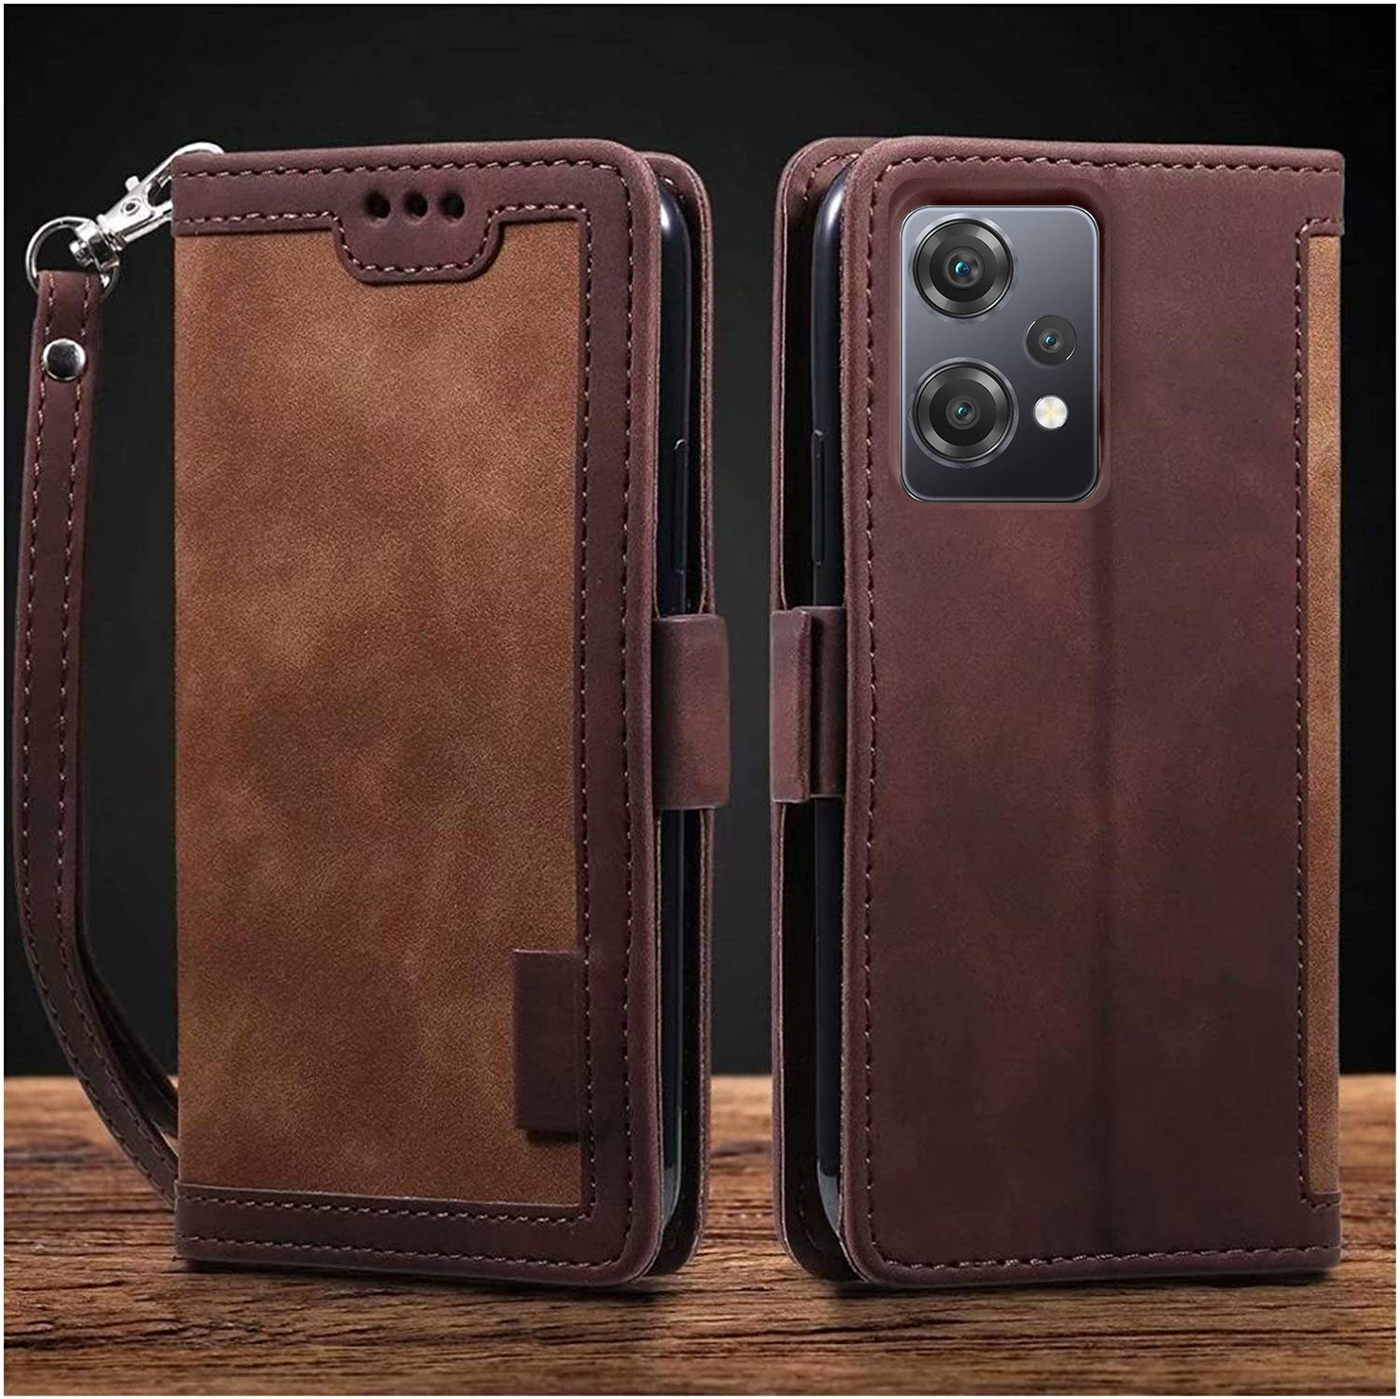 Excelsior Premium PU Leather Wallet flip Cover Case For Oneplus Nord CE 2 Lite 5G